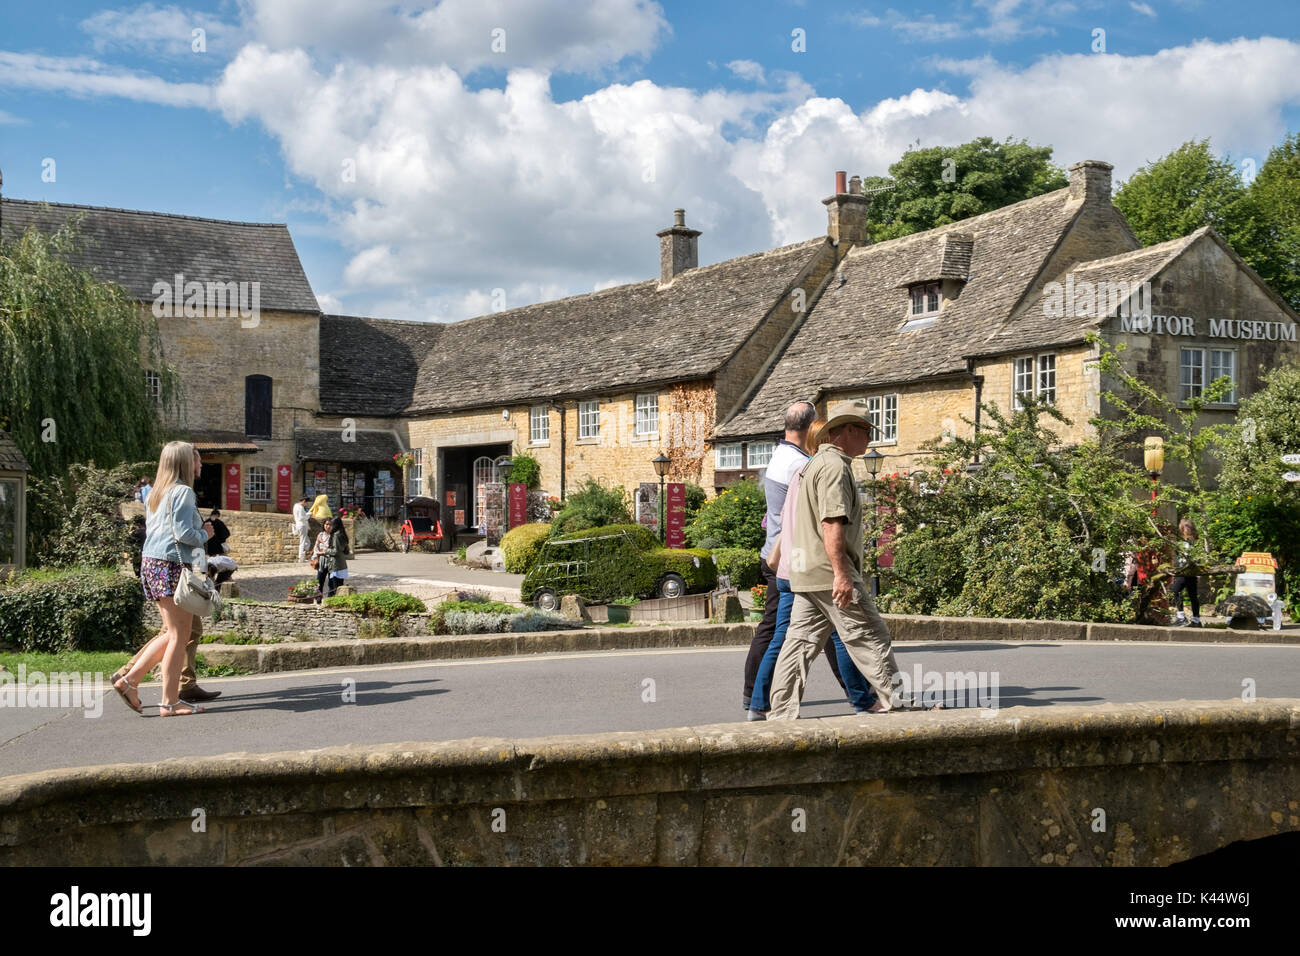 Visitors walking over a bridge crossing the river Windrush infront of the Cotswold motoring museum in Bourton on the Water, Gloucestershire, UK Stock Photo